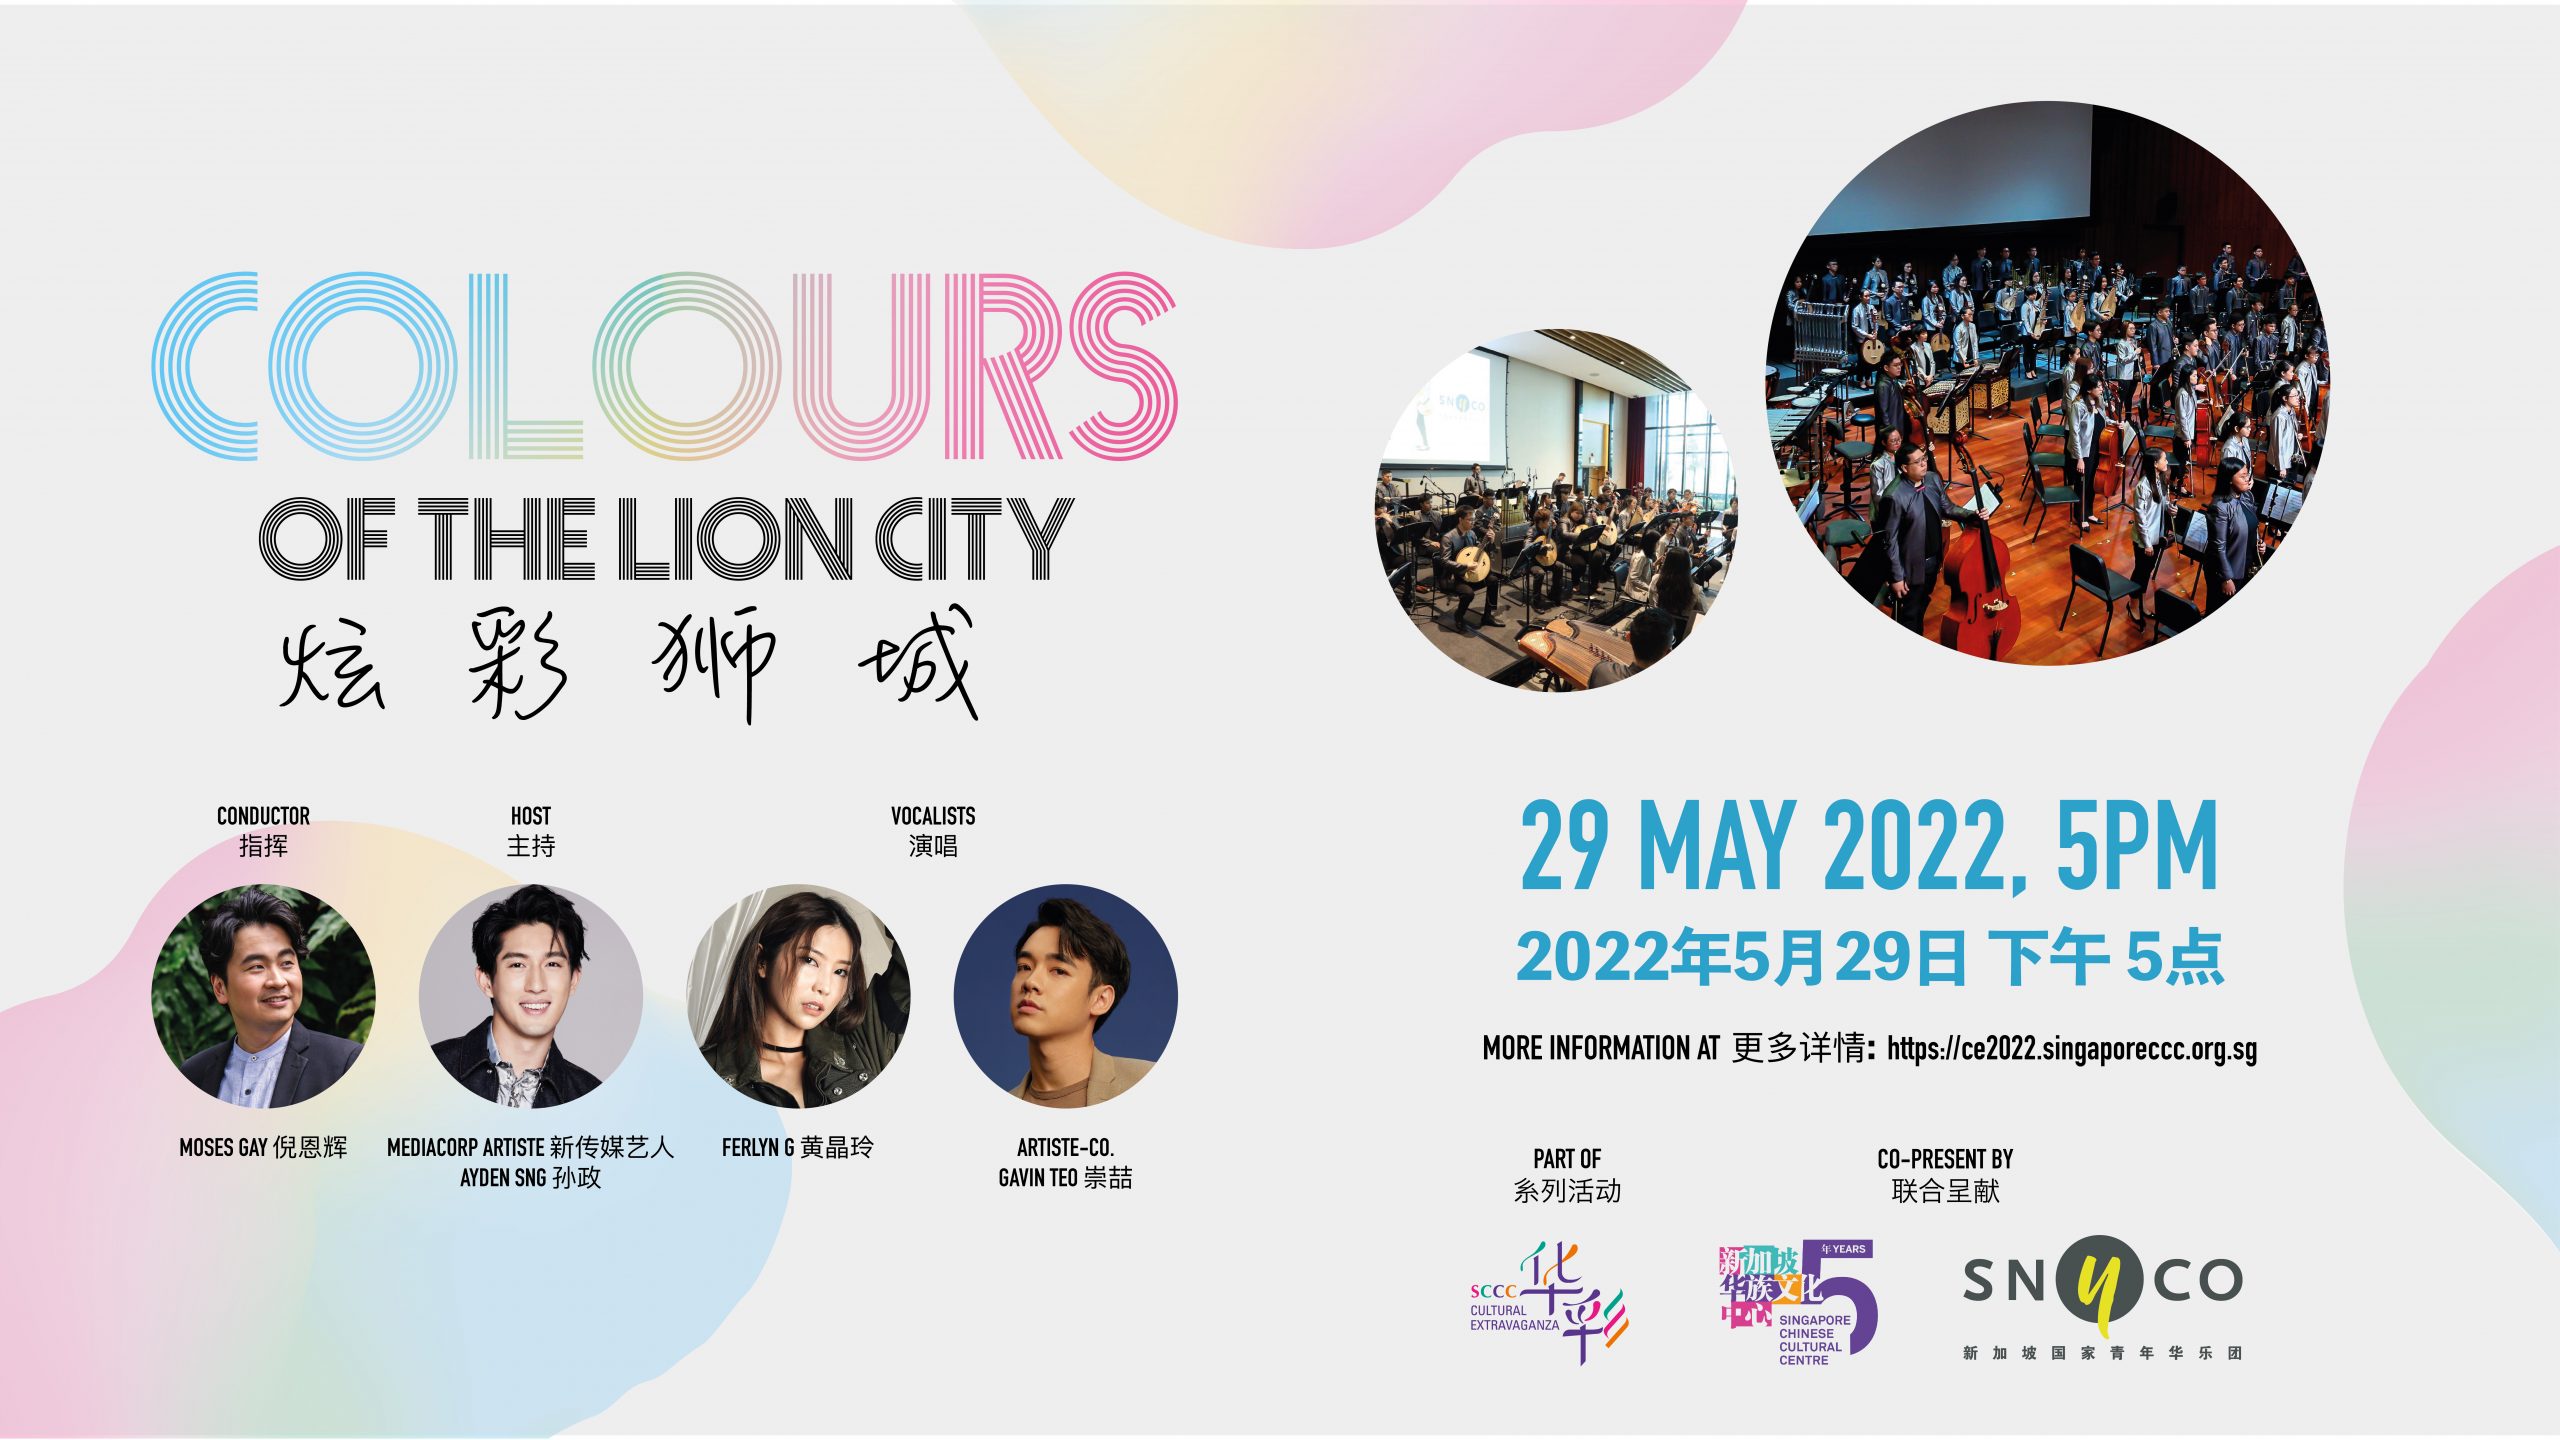 colours-of-the-lion-city-cultural-extravaganza-2022-website-banner-2